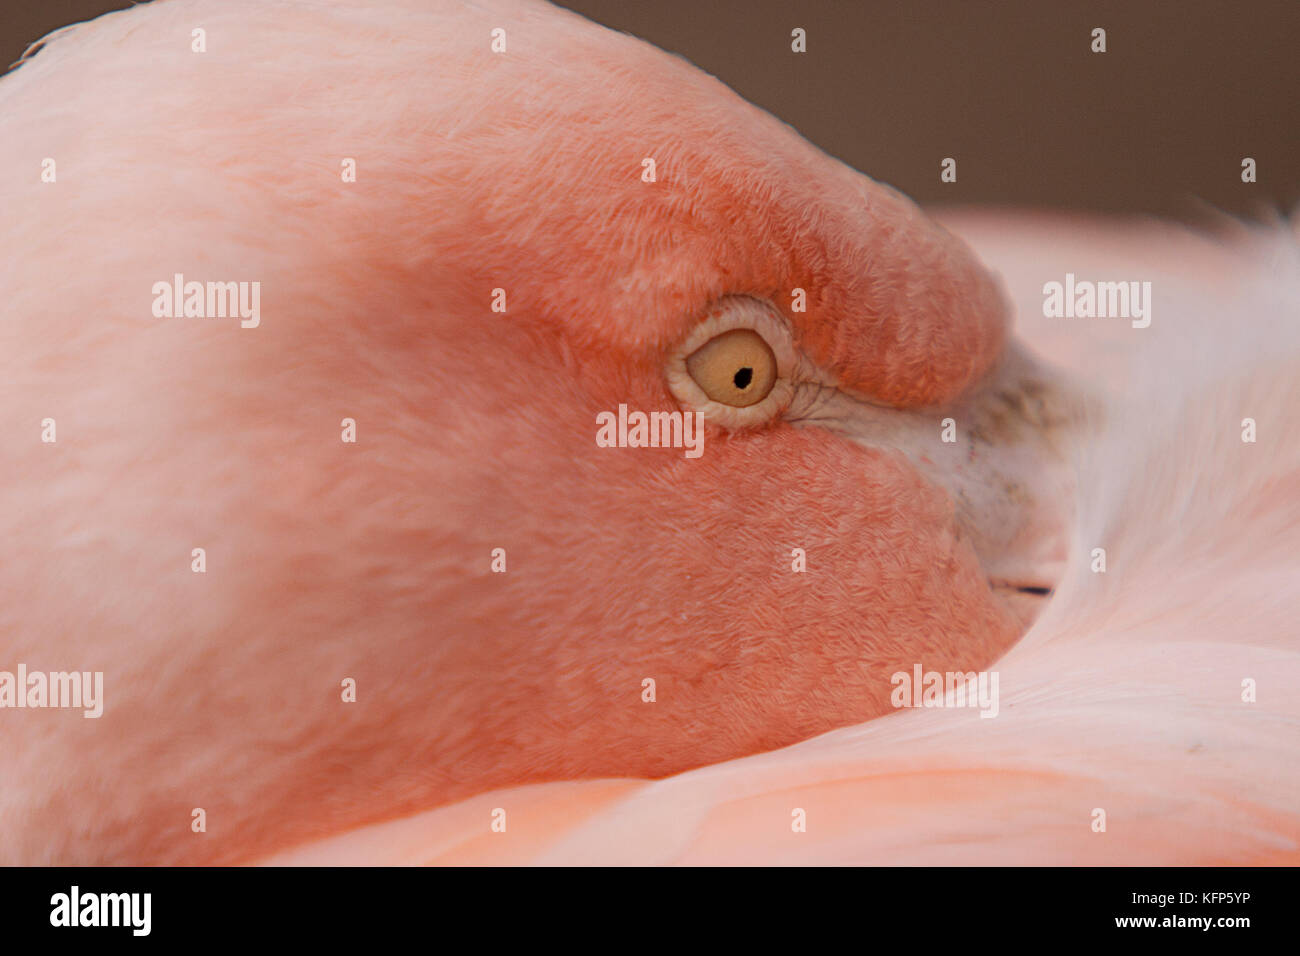 The Eye of the Pink Flamingo Stock Photo